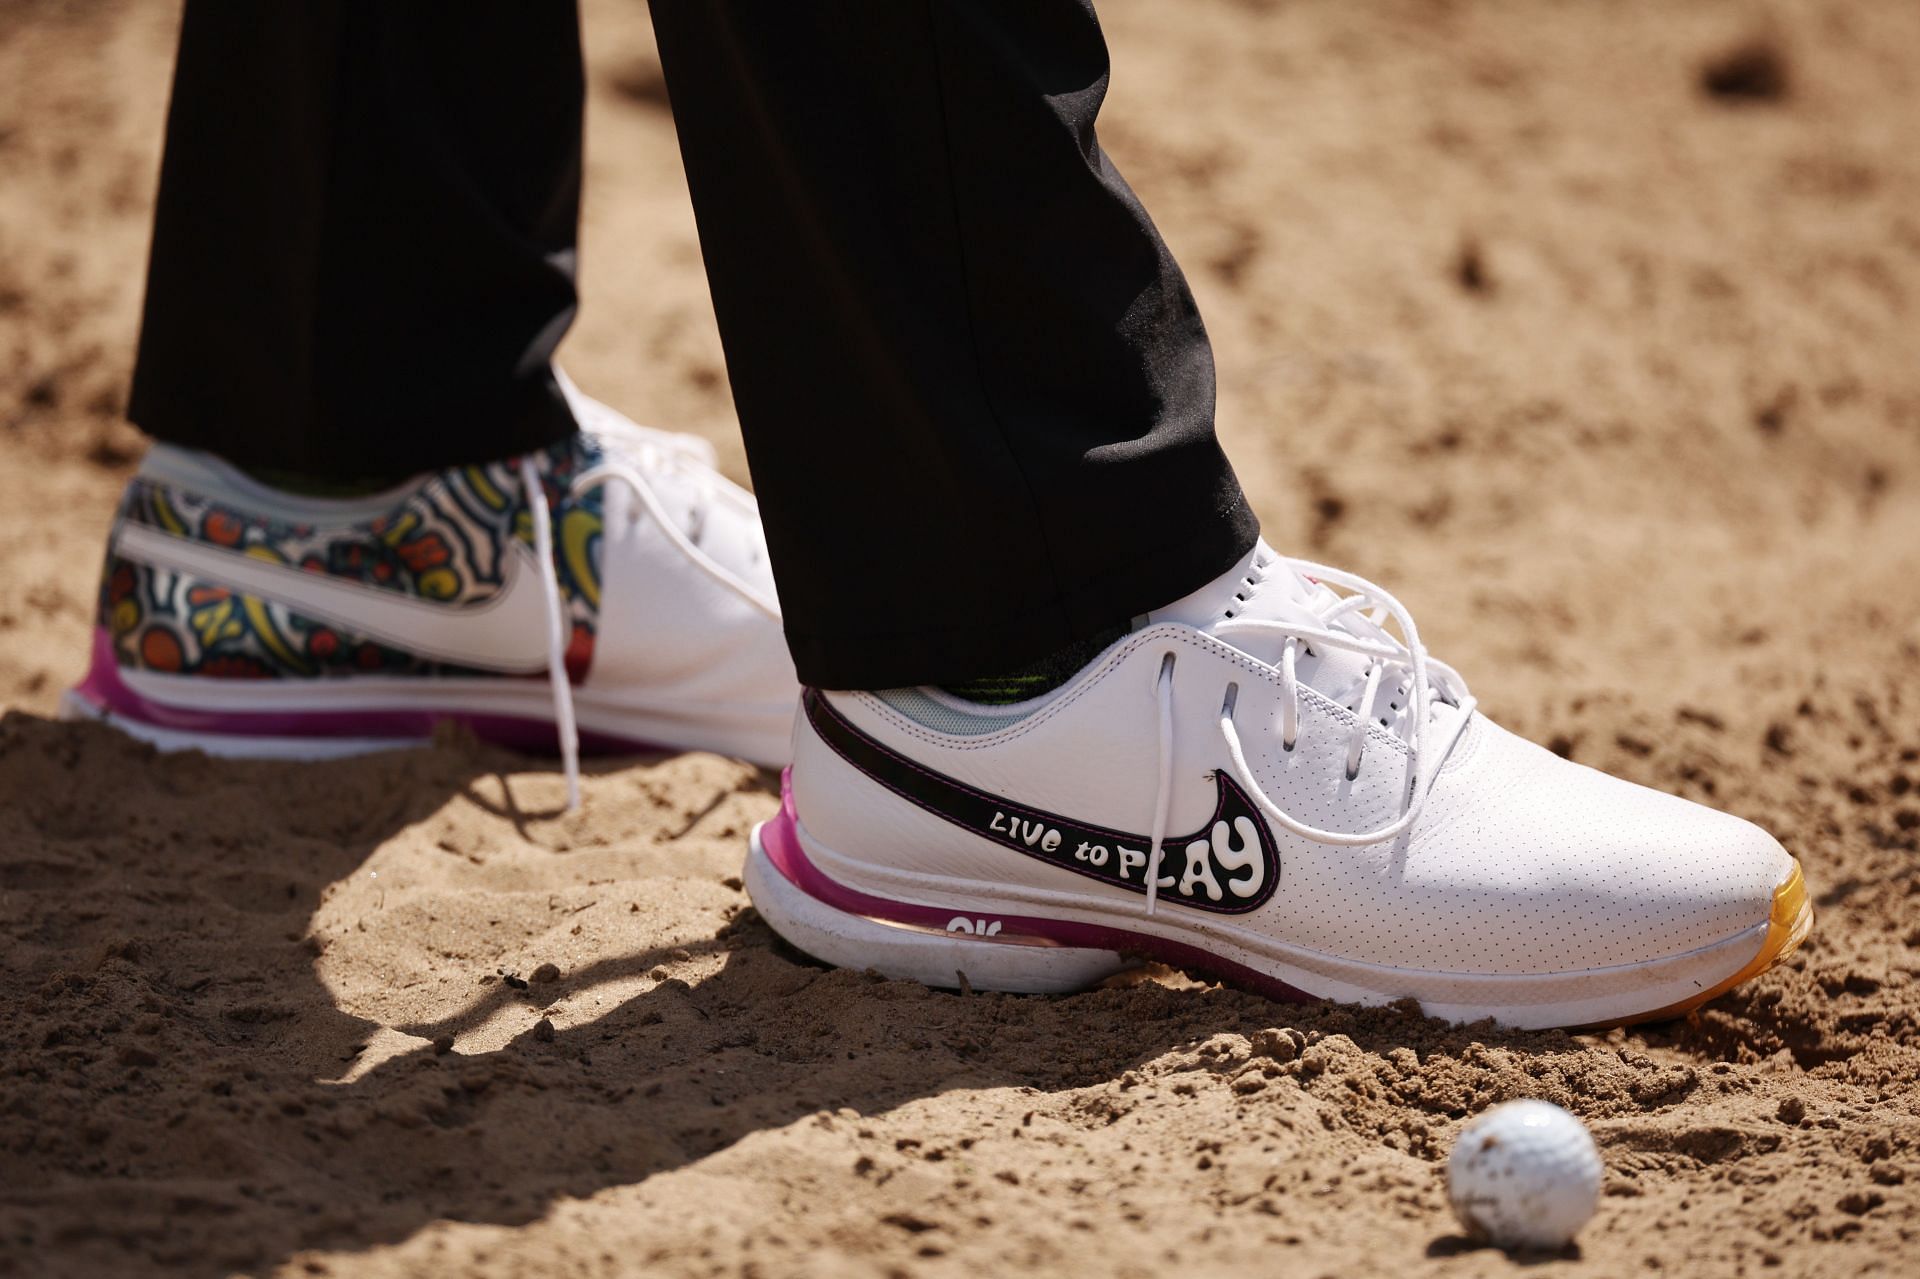 Rory McIlroy&#039;s shoes at The Open (Image via Getty)